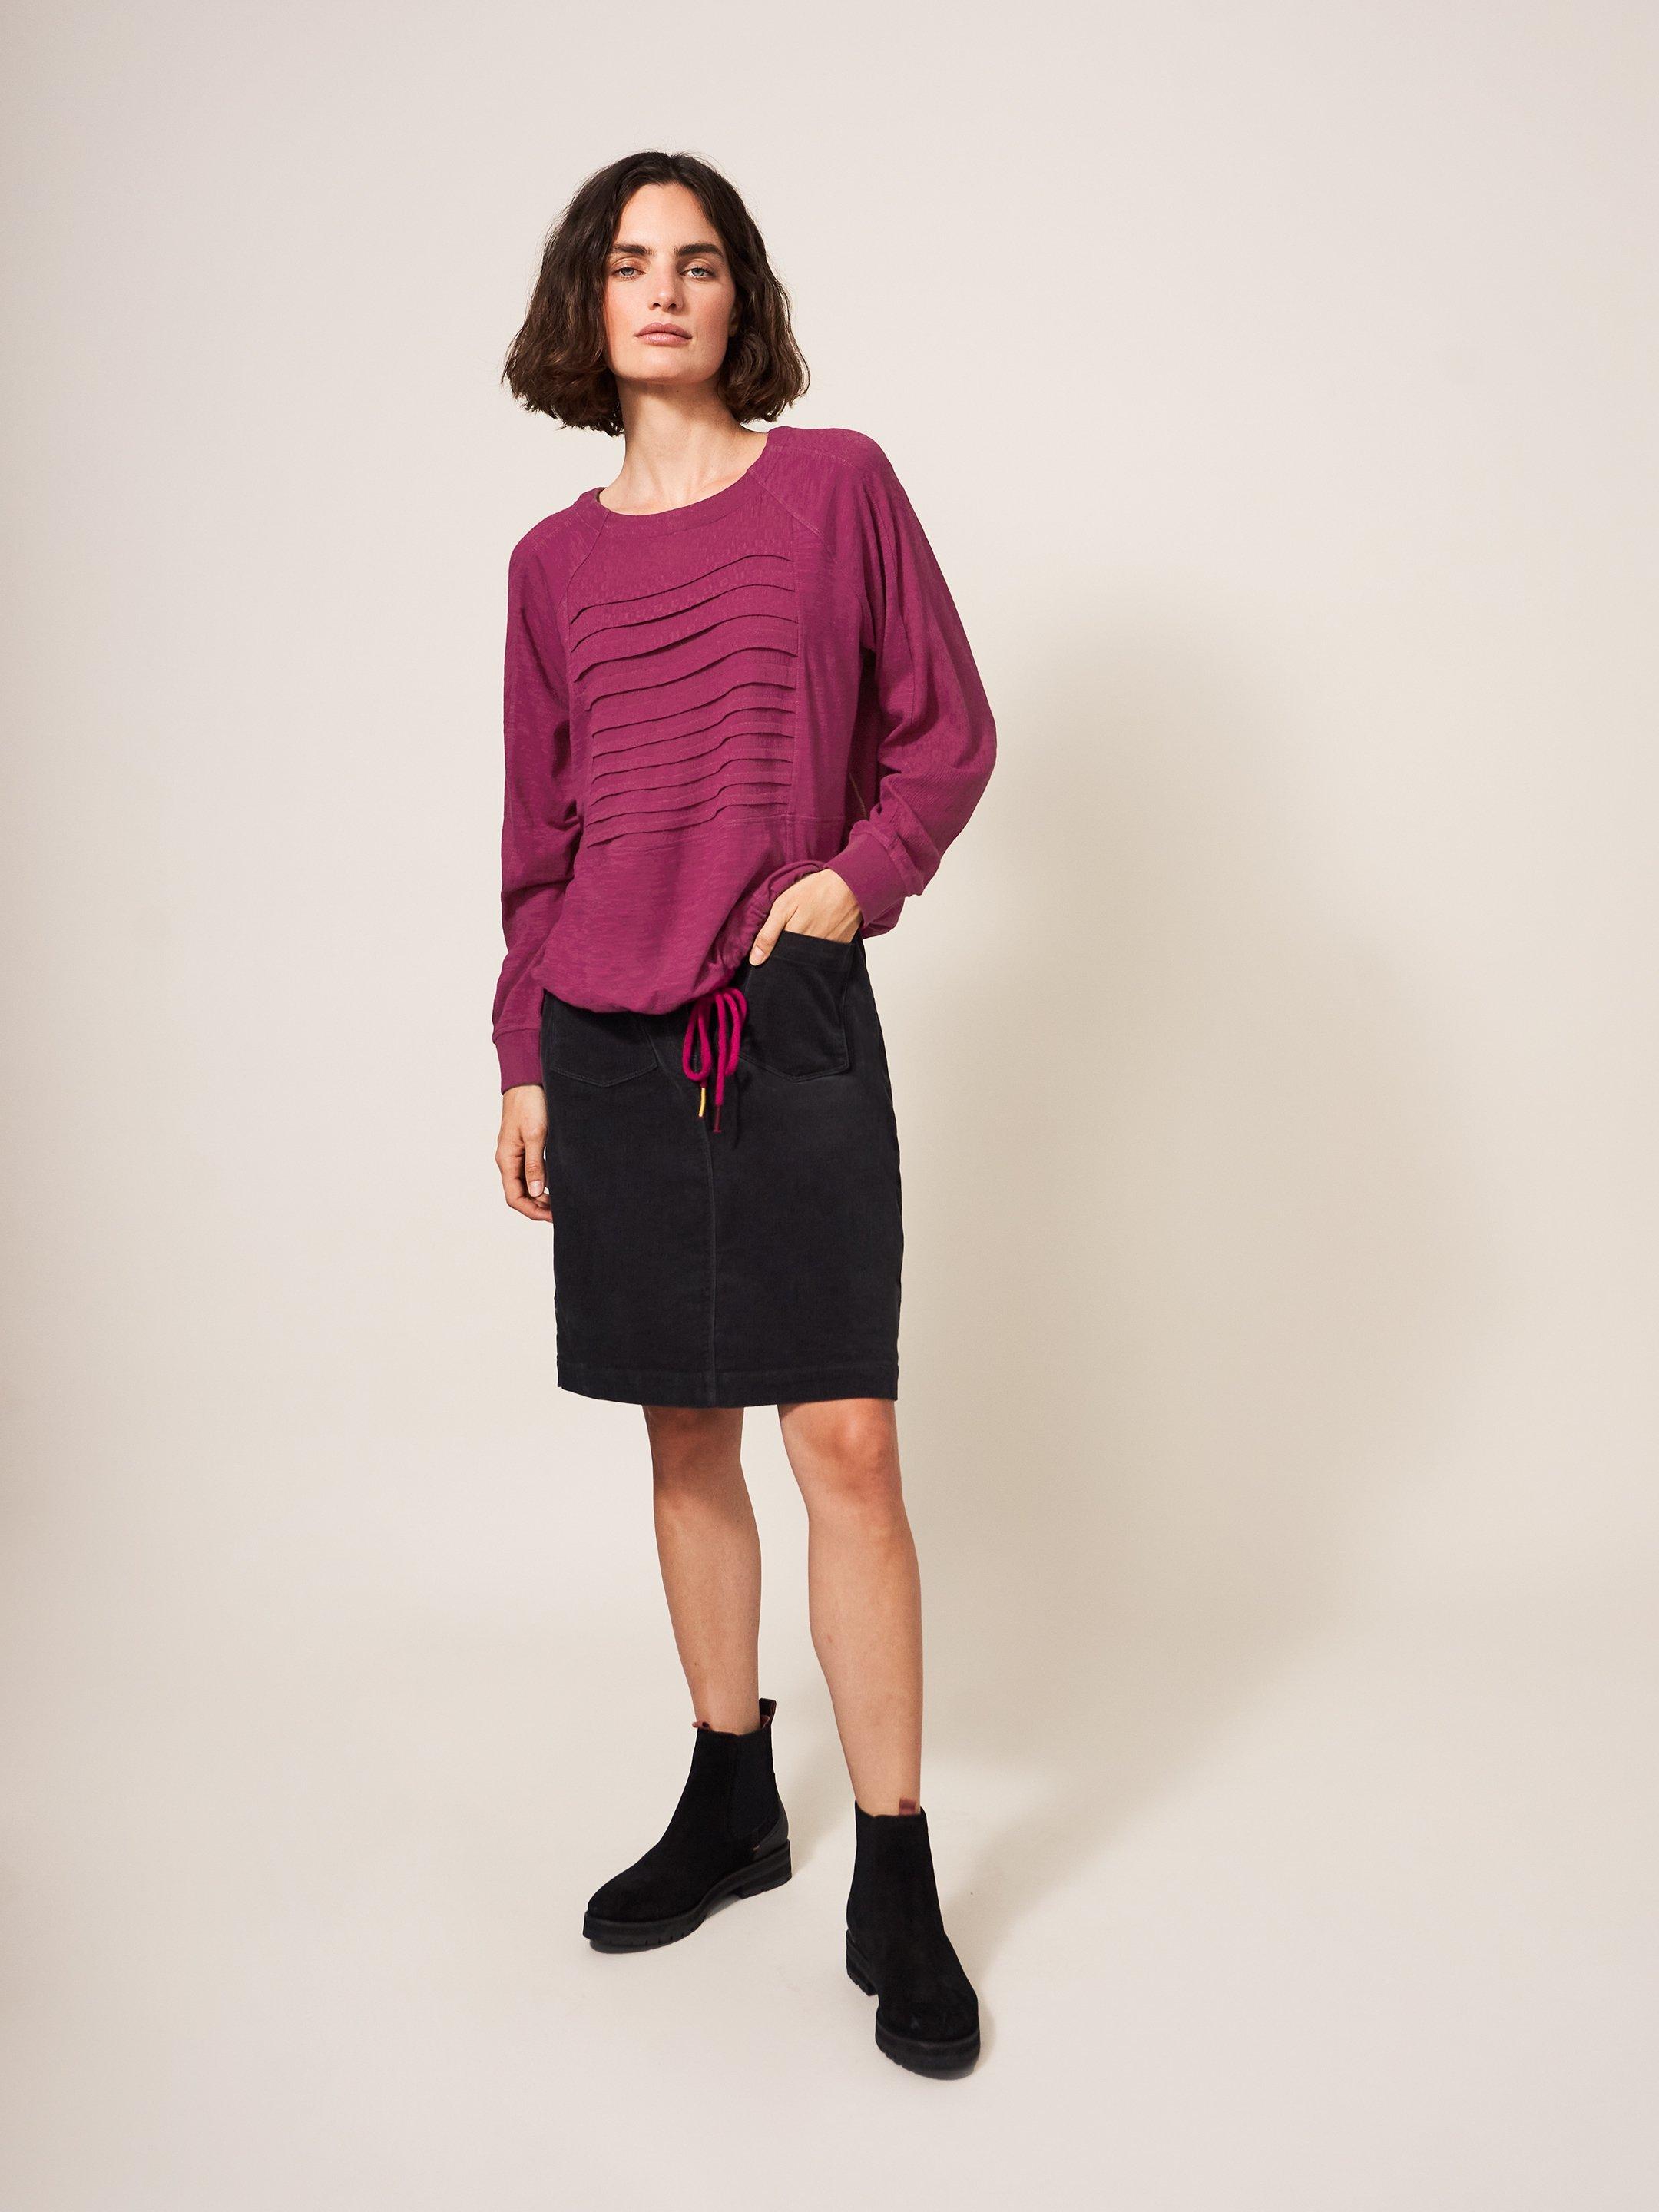 Inca Jersey Mix Top in DEEP PINK - LIFESTYLE